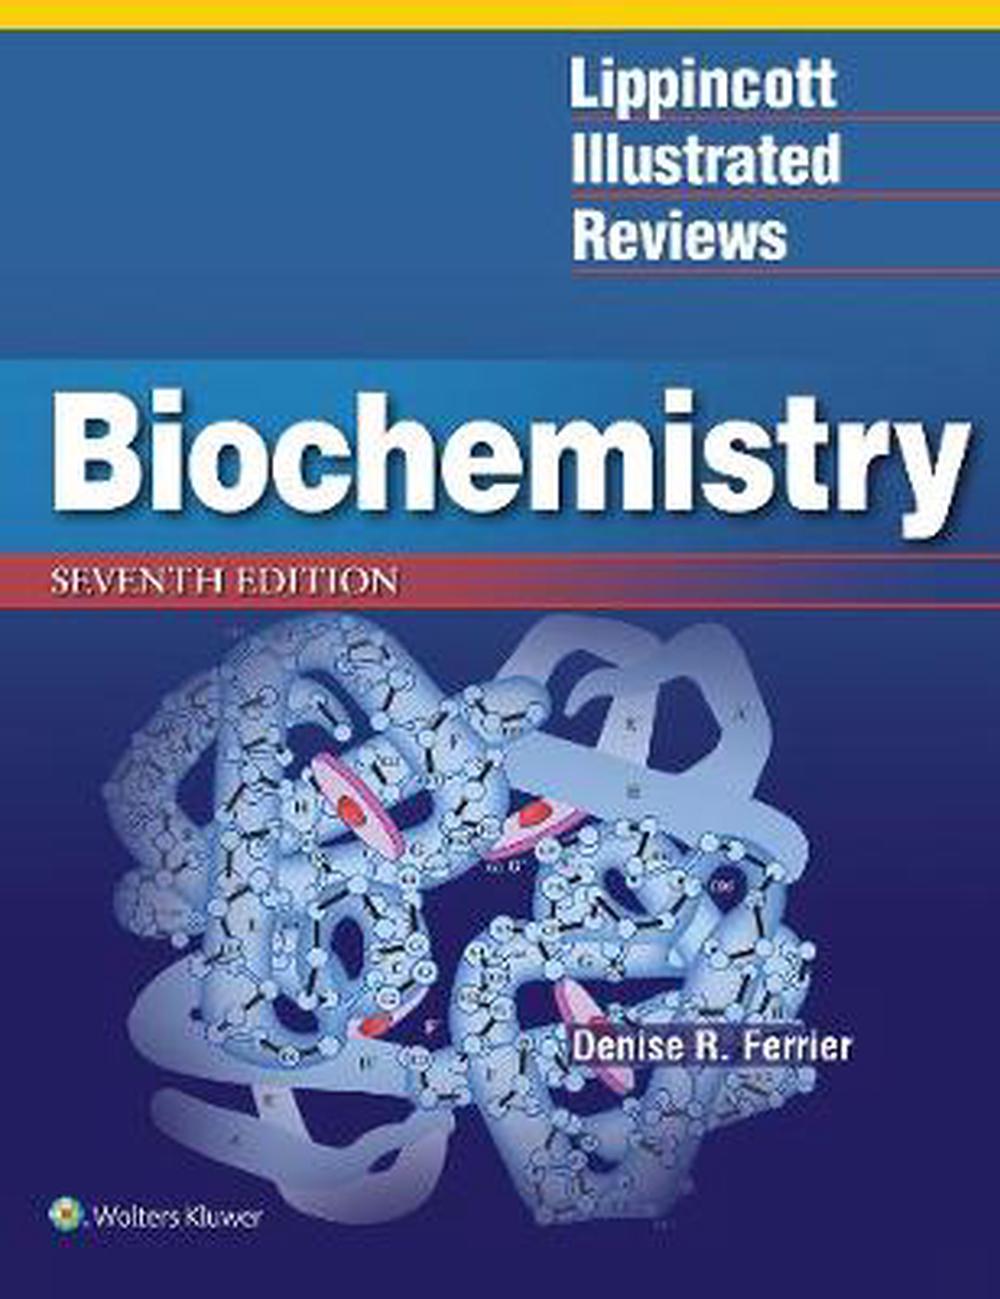 medical biochemistry an illustrated review download